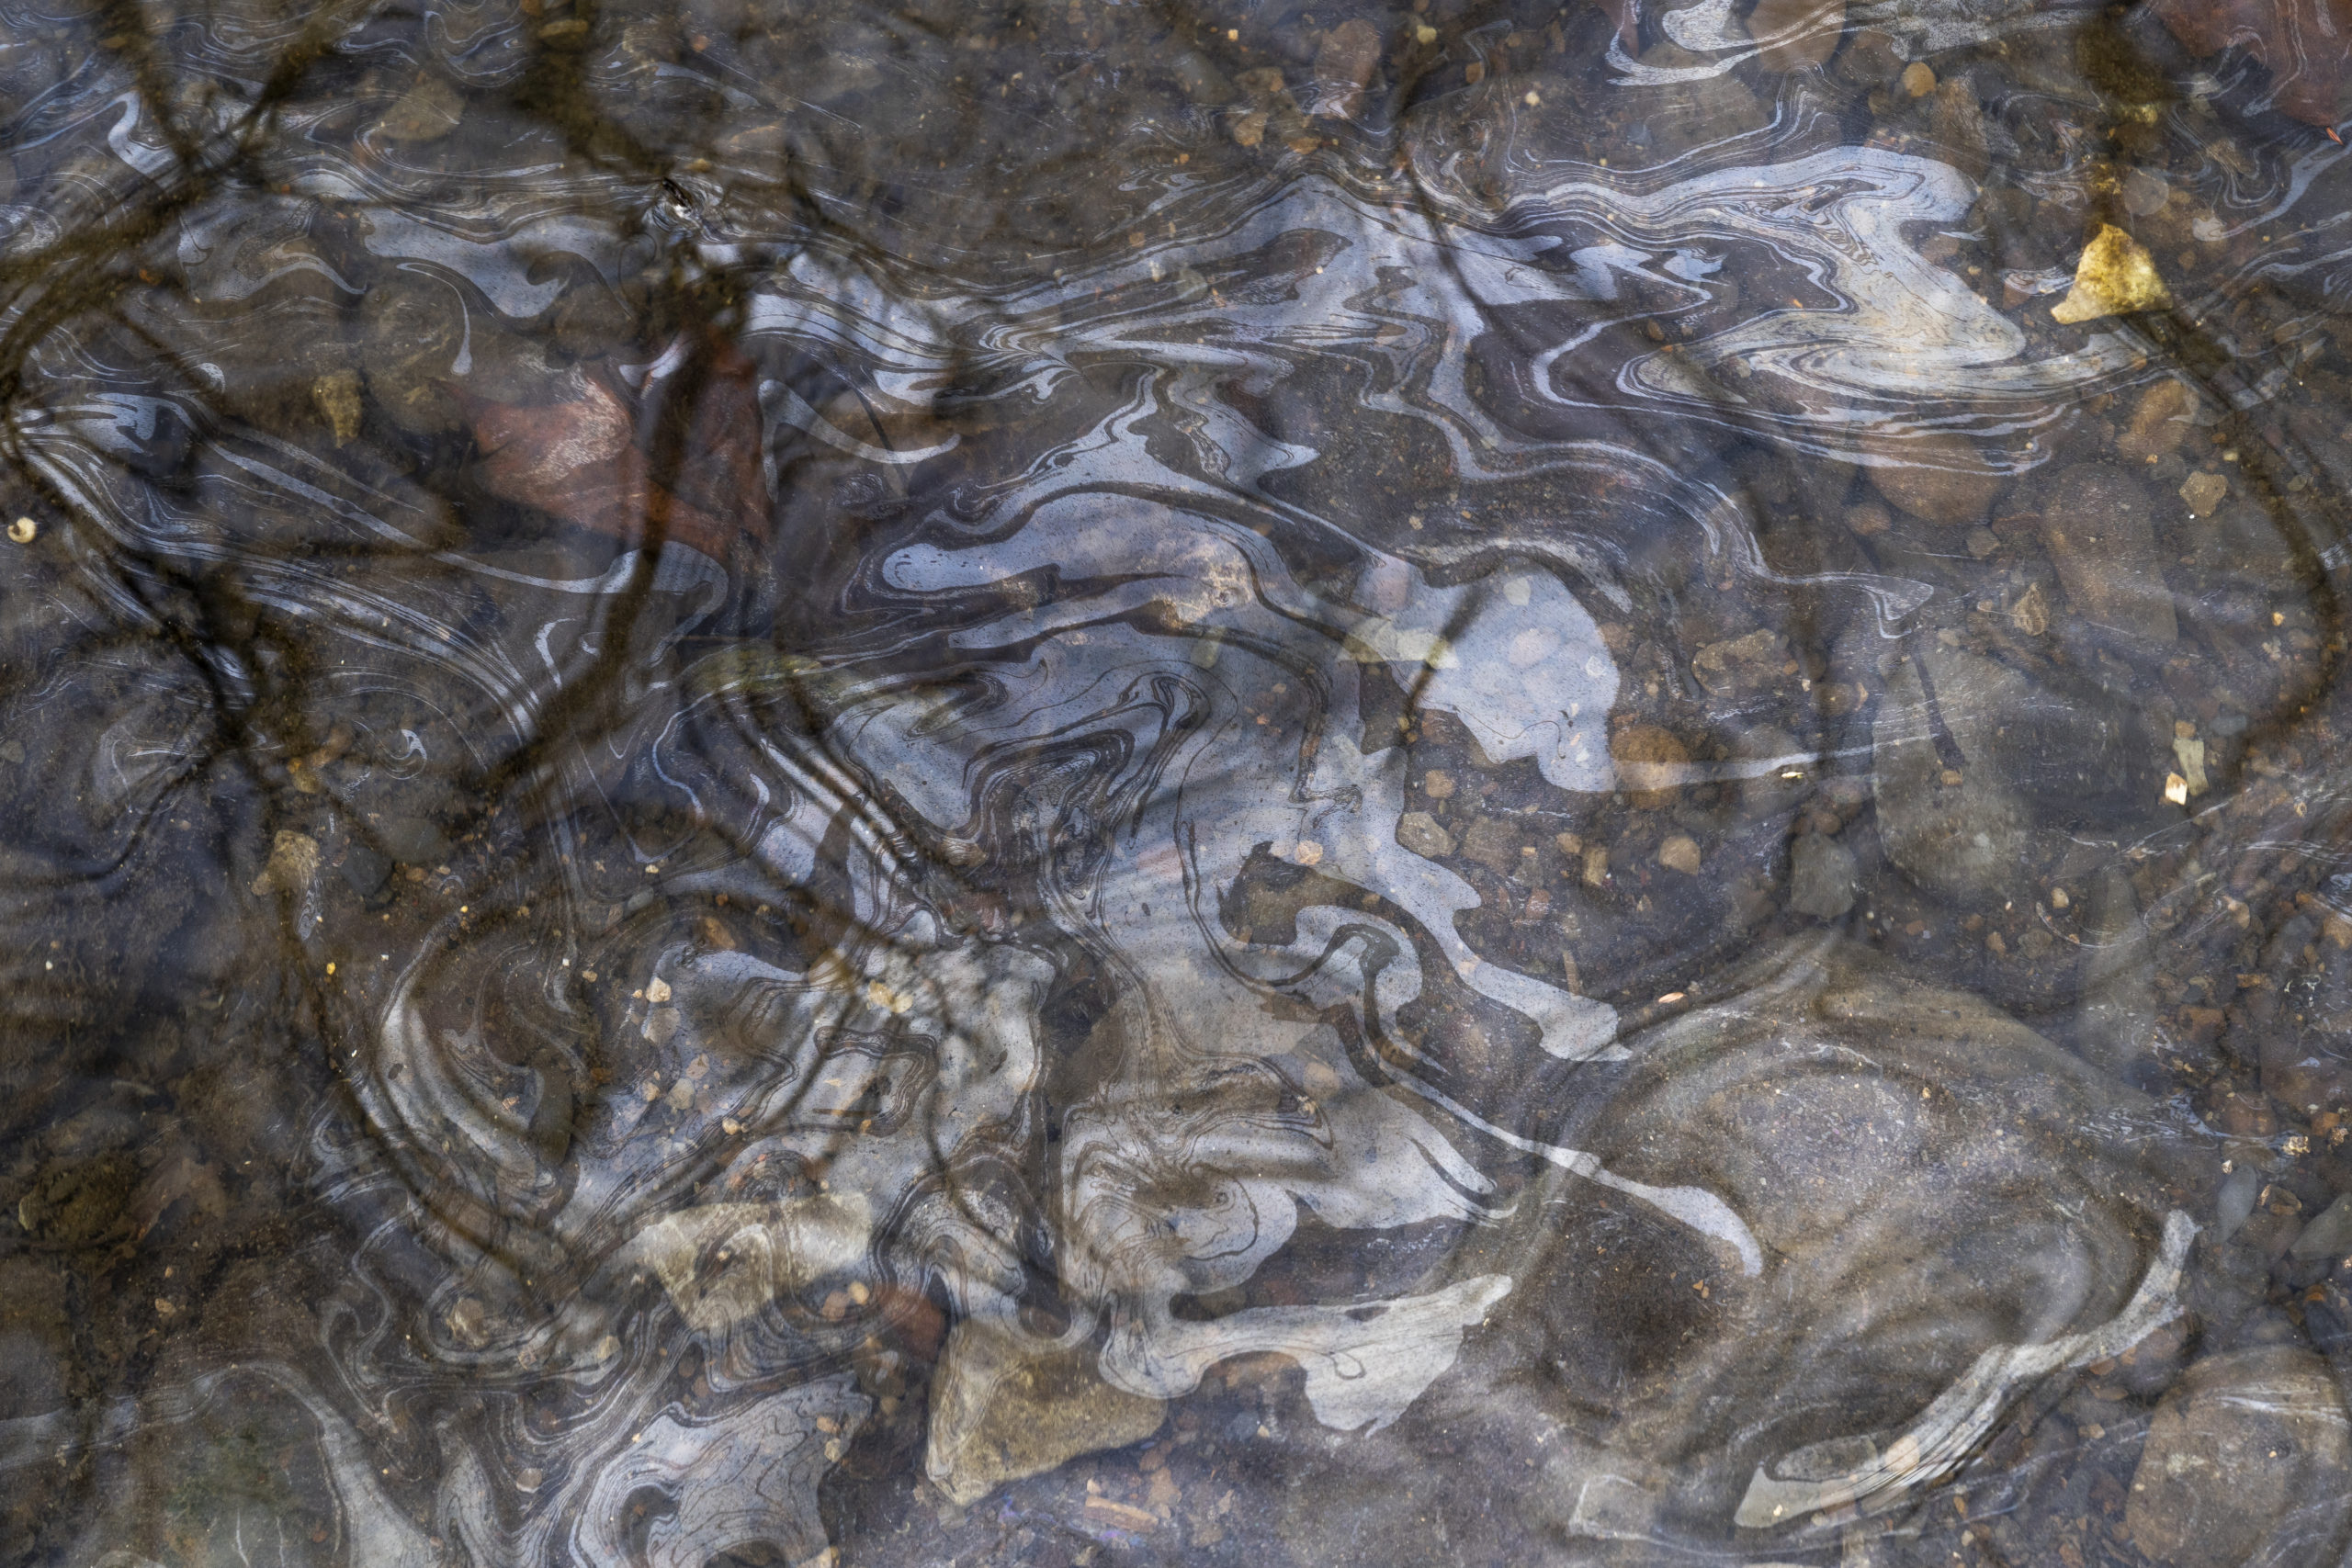 Petroleum based chemicals float on the top of the water in Leslie Run creek after being agitated from the sediment on the bottom of the creek on February 20, 2023 in East Palestine, Ohio following a train derailment prompting health concerns.